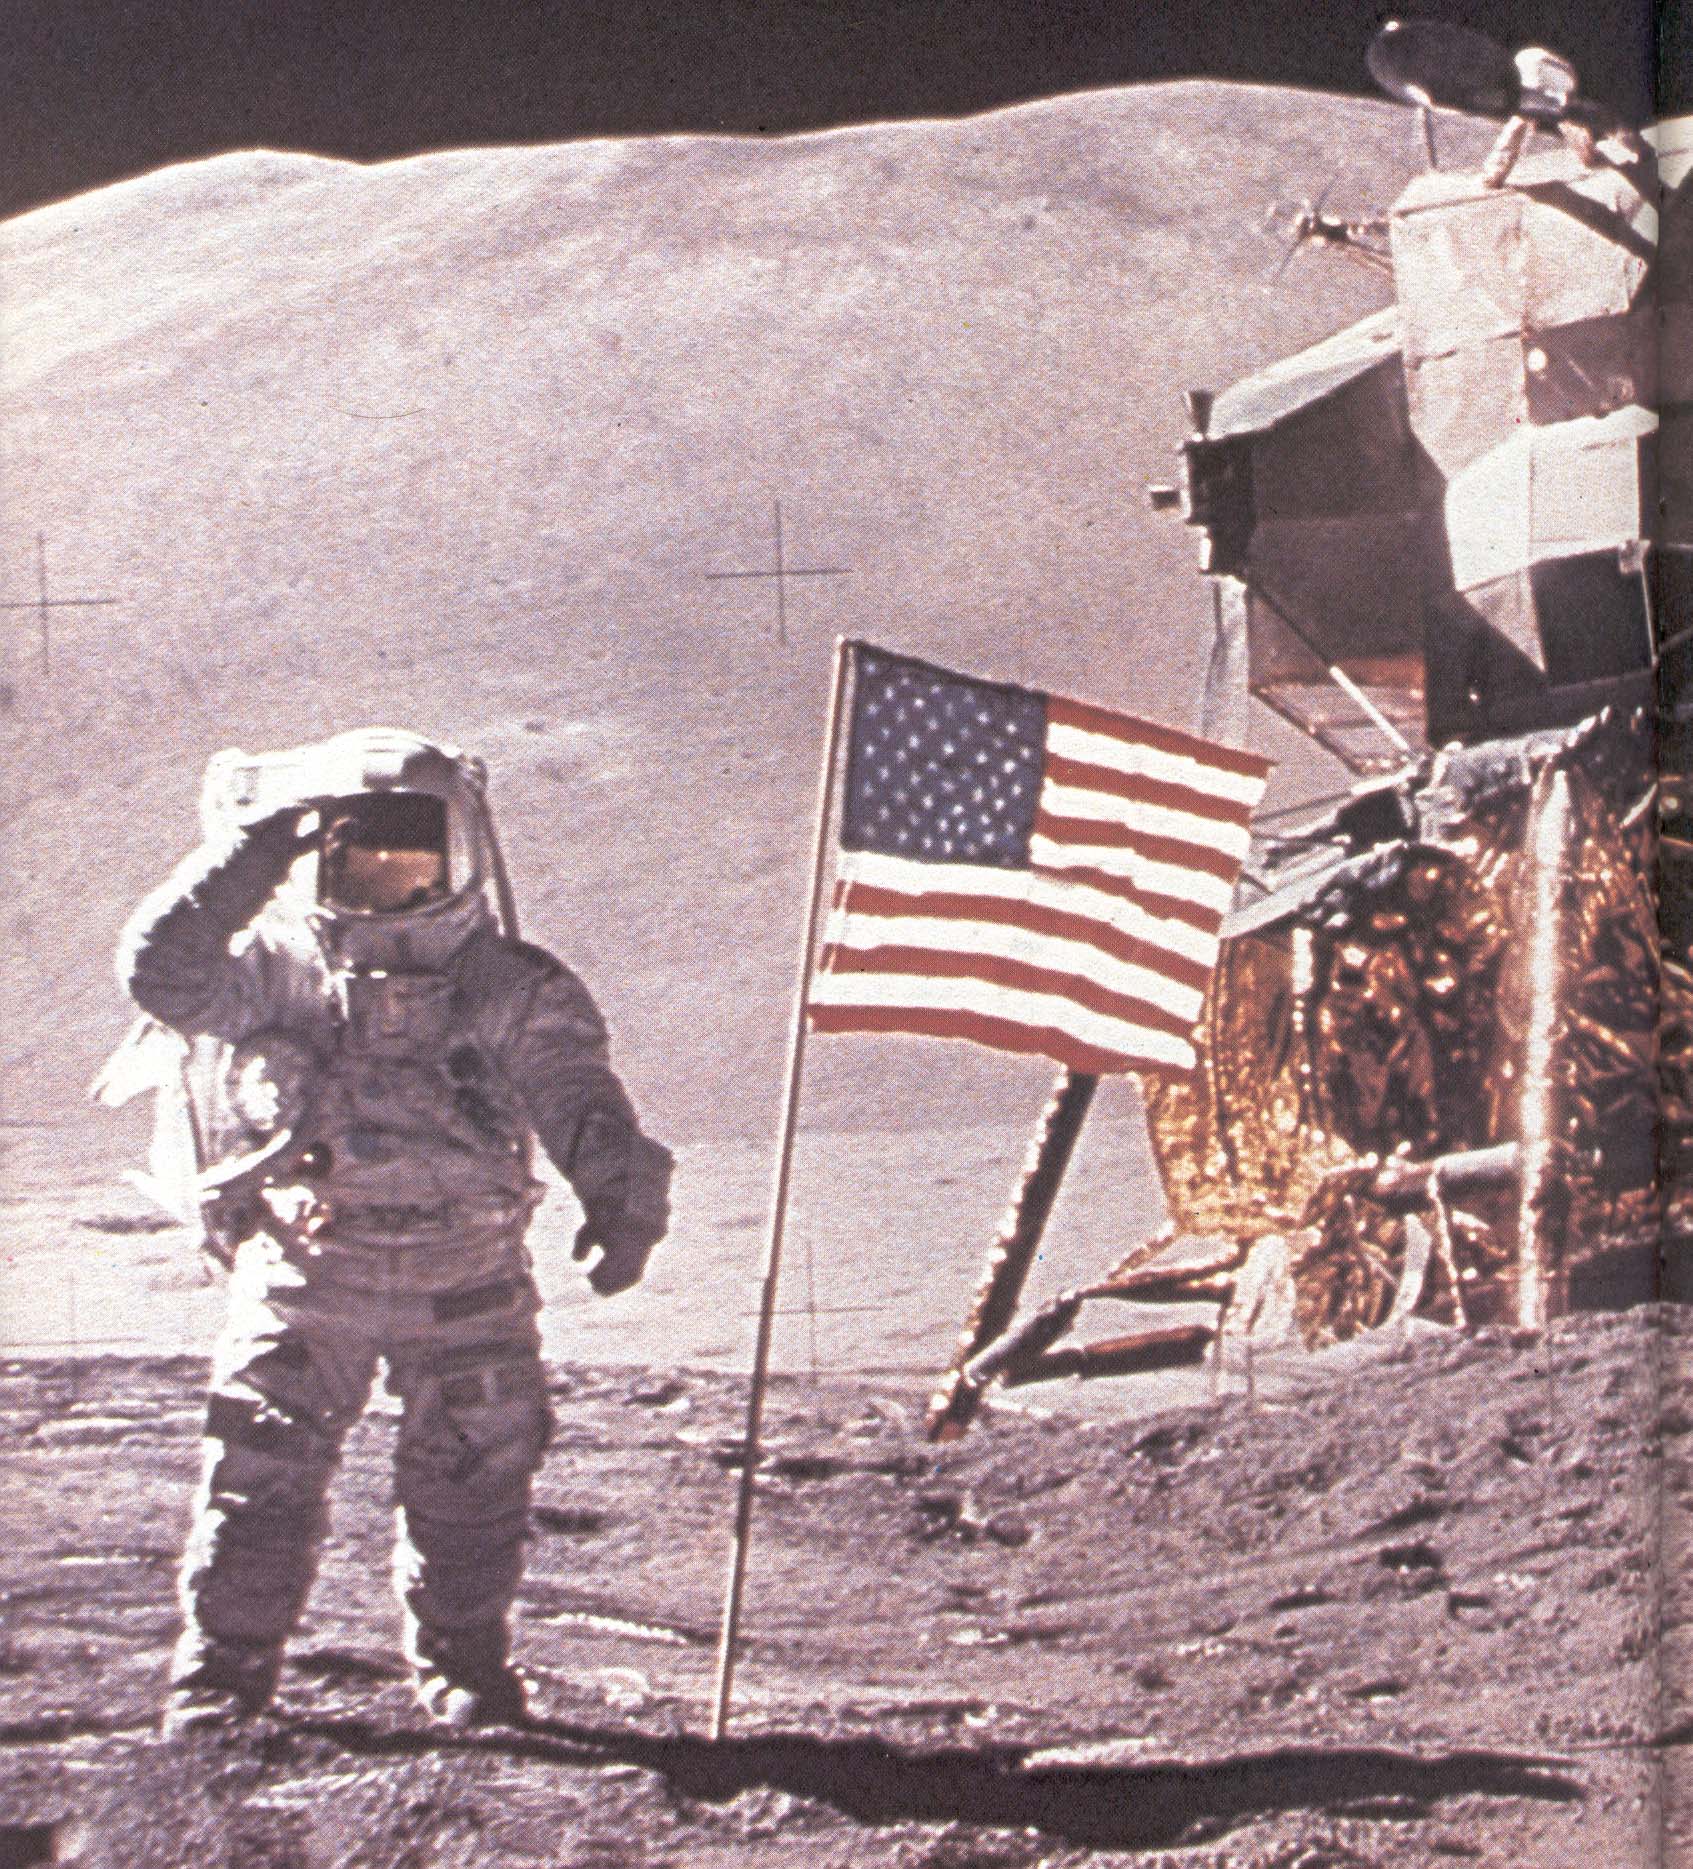 Astronaut on the moon by lunar lander and American flag.